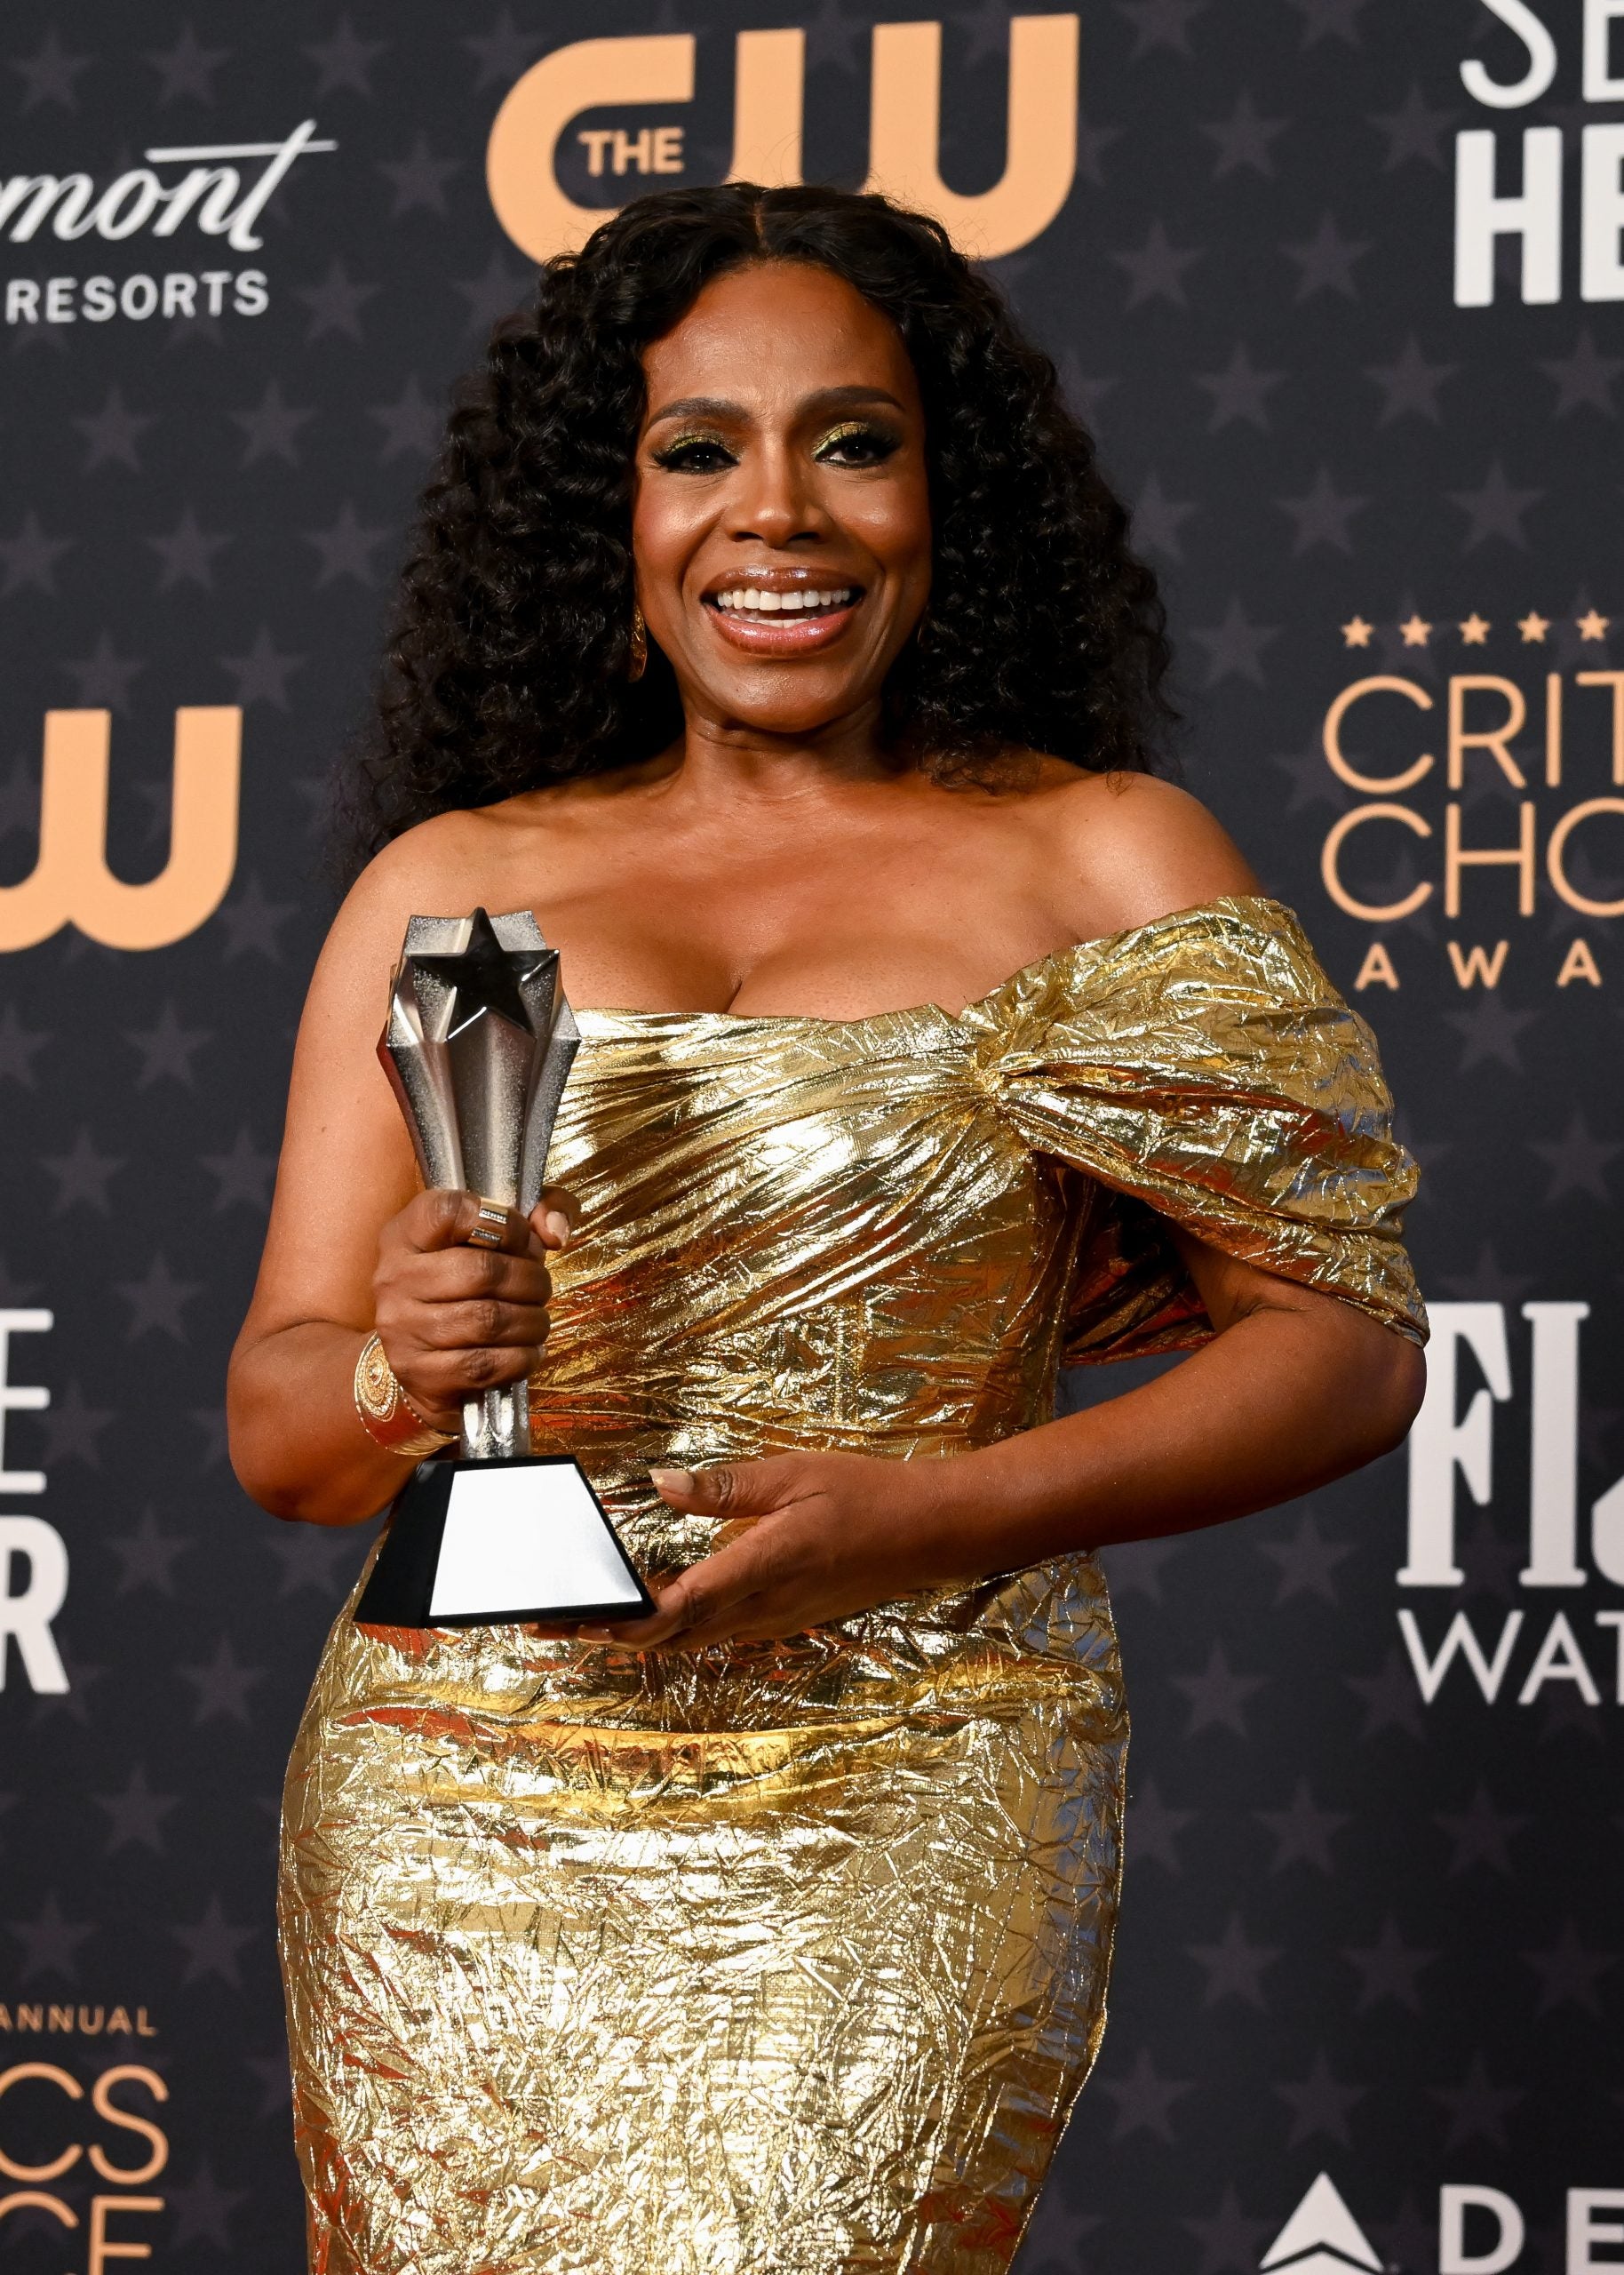 The Winners of the 28th Annual Critics Choice Awards – Critics Choice Awards